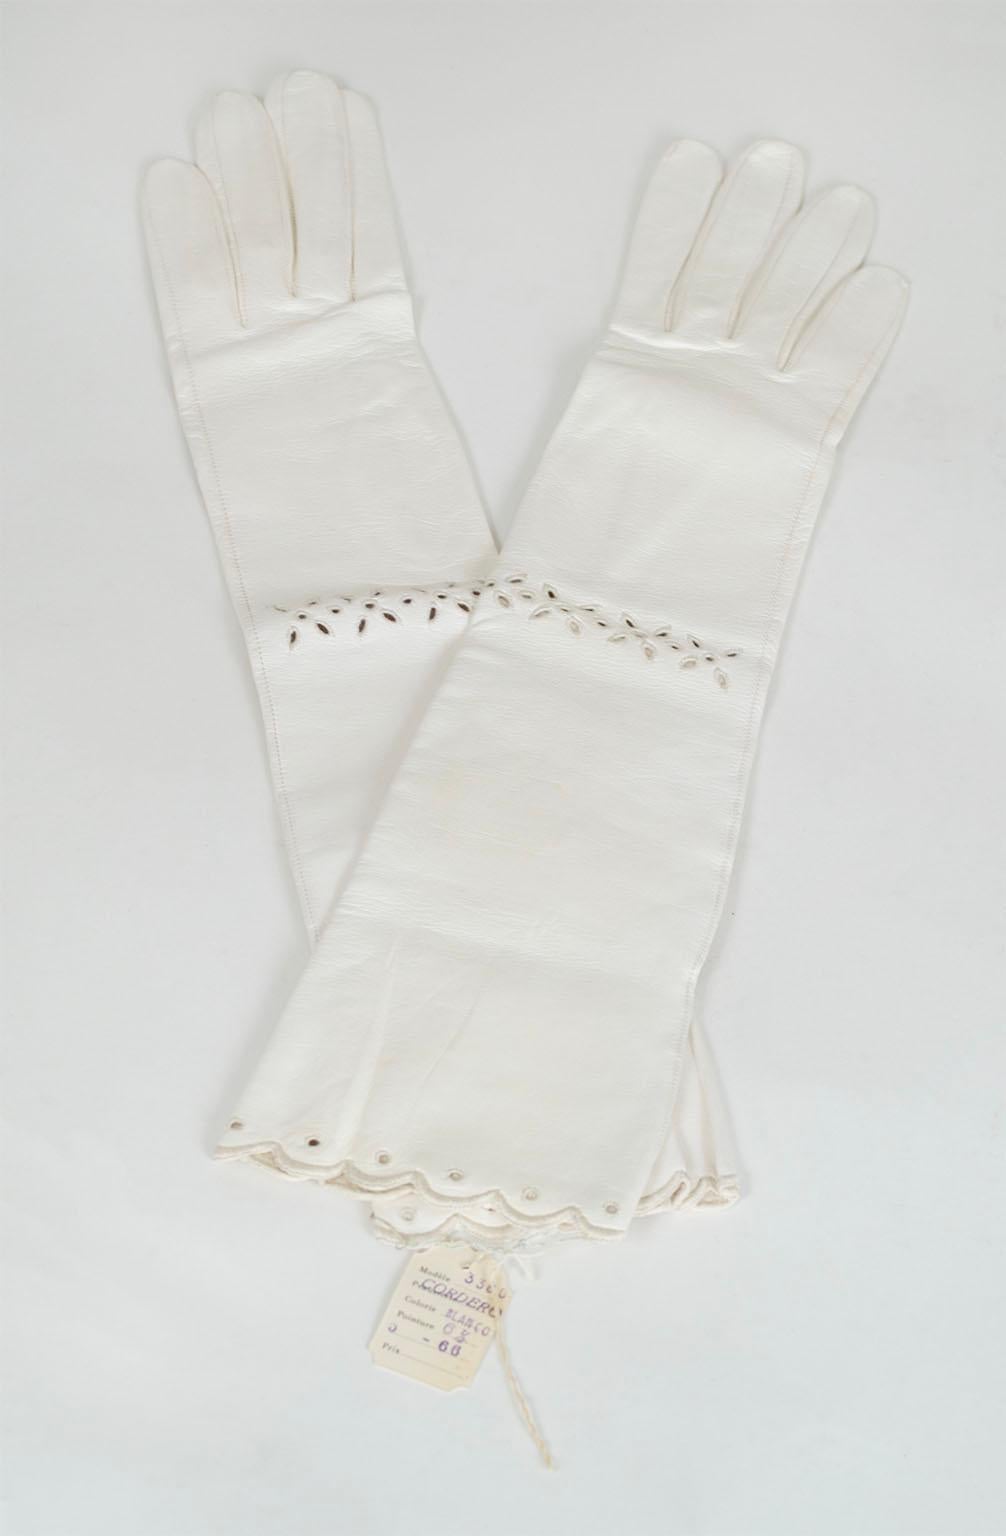 In pristine, brand new condition, these gloves are the pinnacle of femininity thanks to their delicate thread-bound eyelets and scalloped edges. In hard-to-find bright white kidskin leather, their elbow length makes them perfect for black